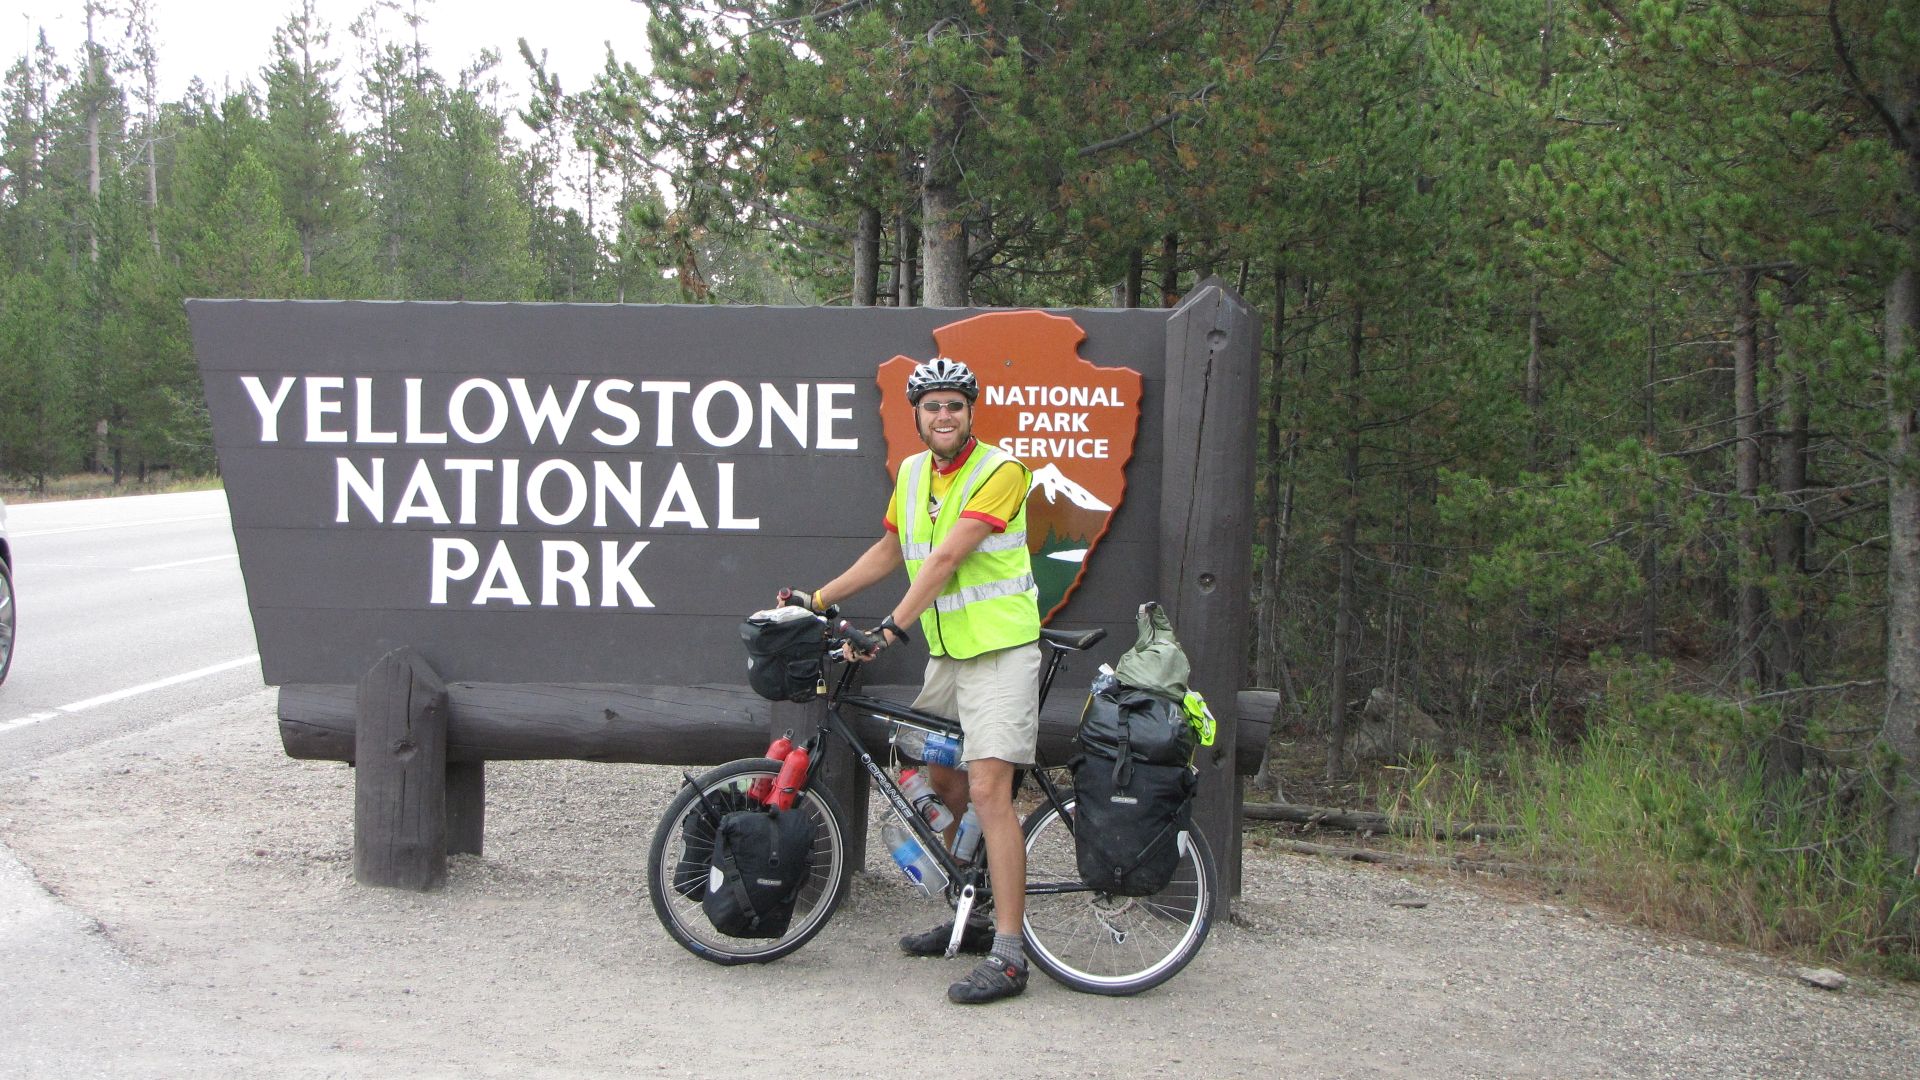 Yellowstone Nat Pk, WY, USA - Park-pass? Check!  Bicycle?  Check!  Luggage?  Check!  Rider ready to cross Continental Divide 3 times in next 100 miles?  Errrr, errrr